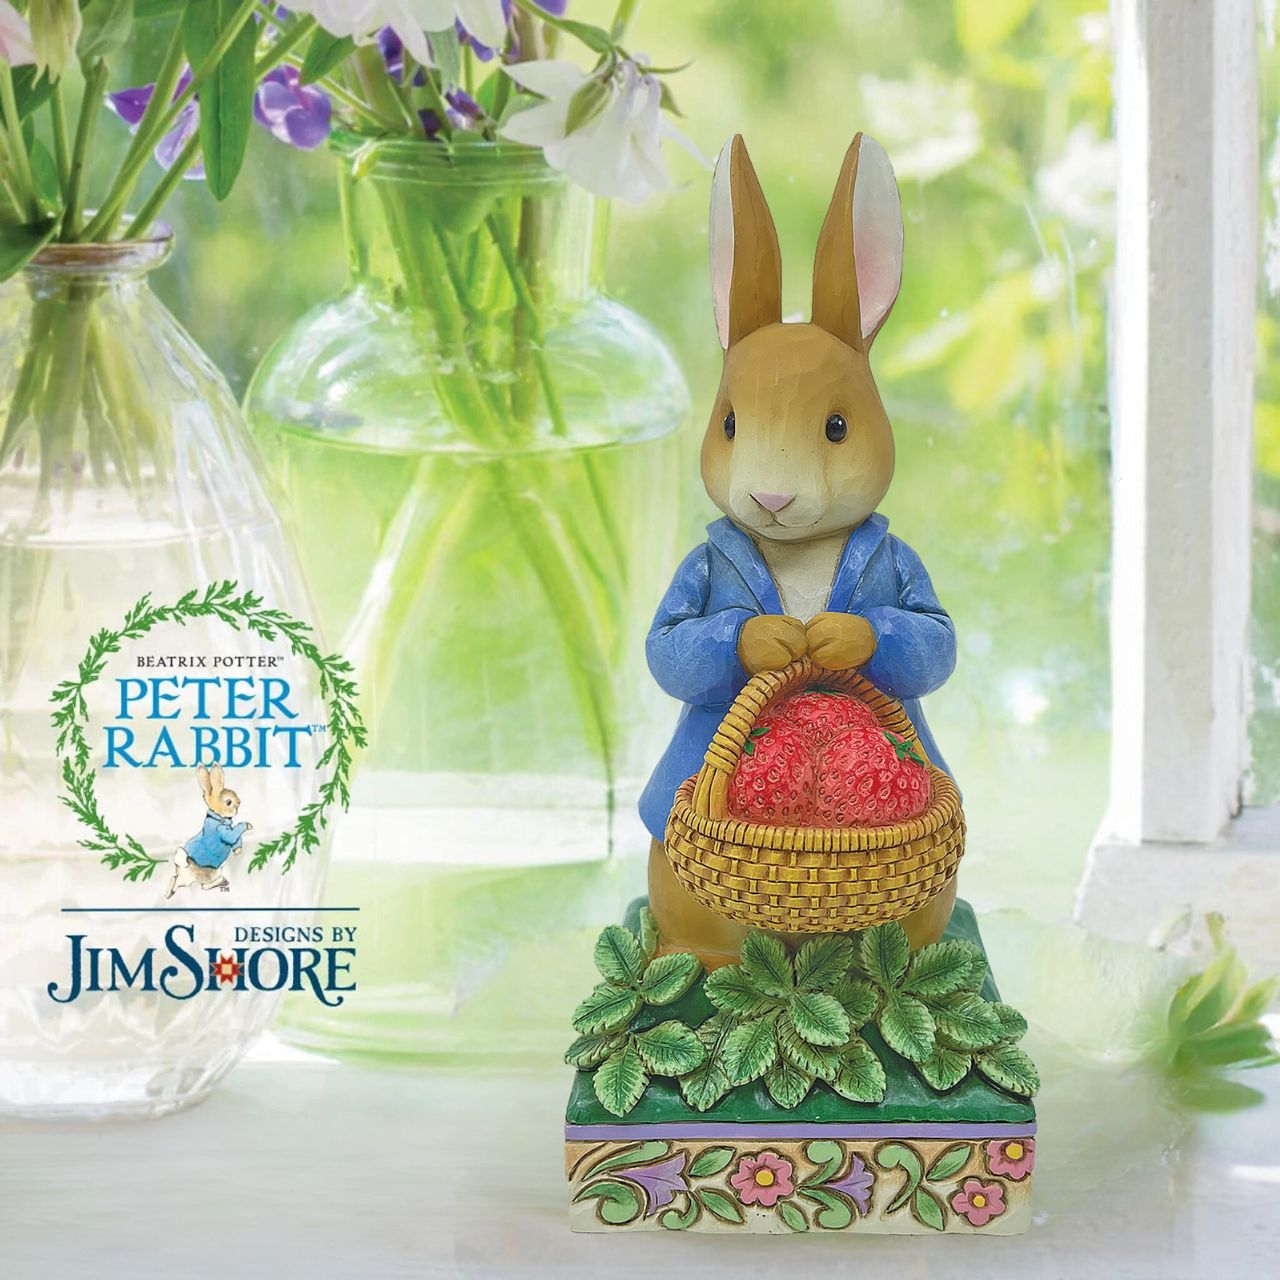 Peter Rabbit with Basket of Strawberries Figurine Made from cast stone. Packed in a branded gift box. Unique variations should be expected as this product is hand painted. Not a toy or children's product. Intended for adults.